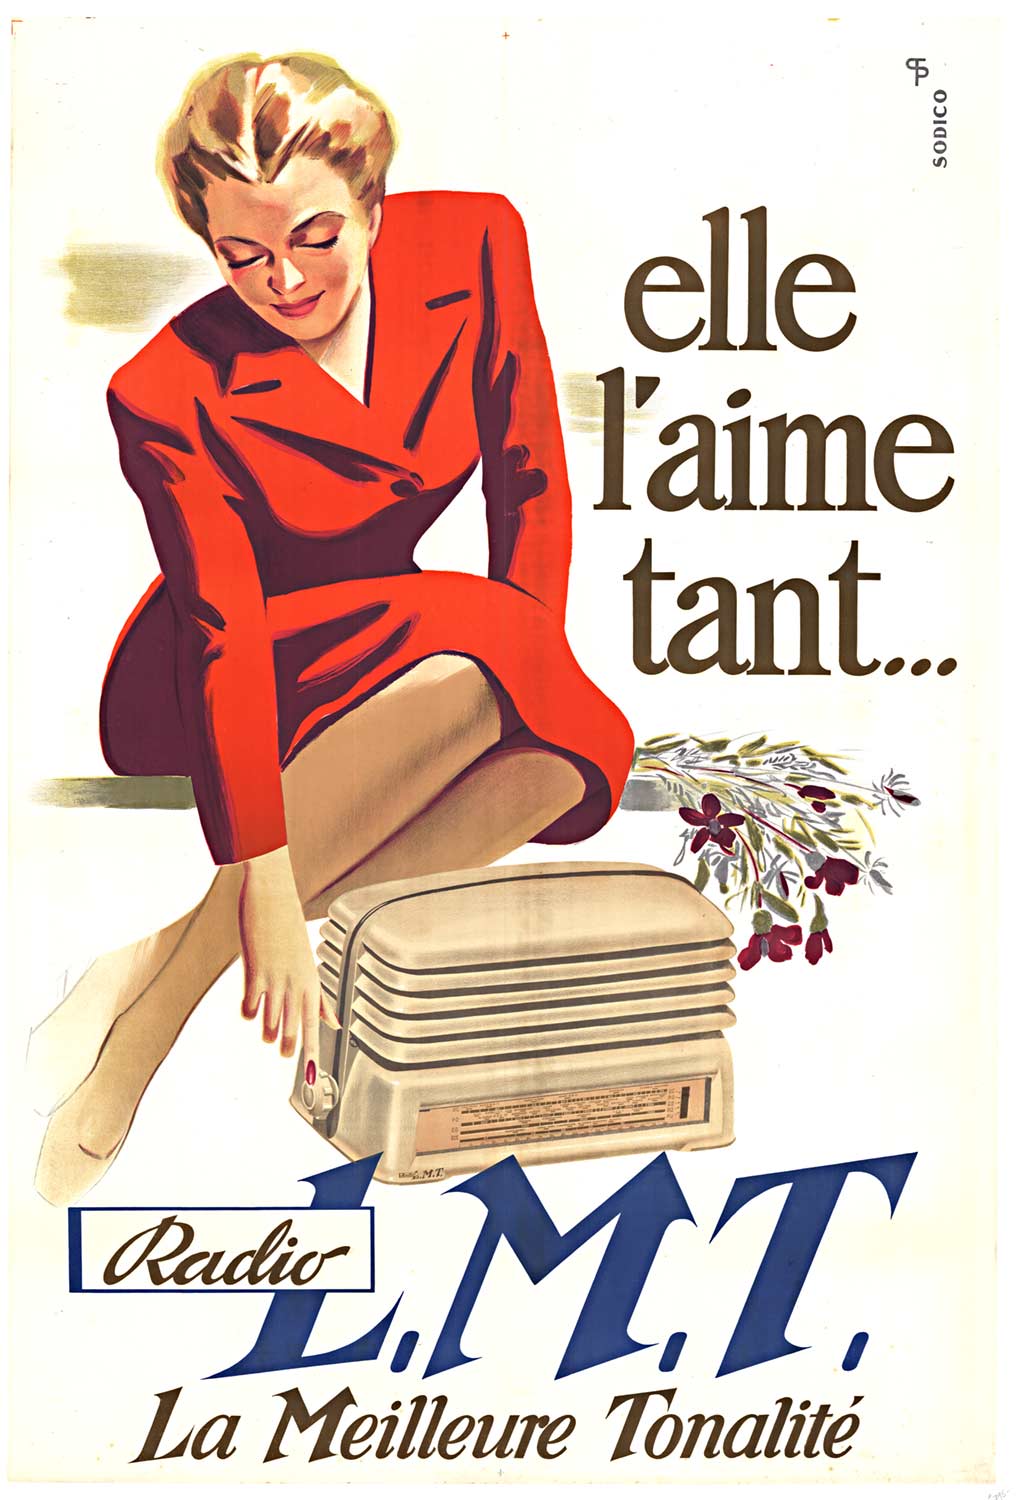 Radio L.M.T. "La Meilleure Tonalite". Elle l'aime tant. <br>Original French antique poster for the L. M. T. Radio. The radio with the best sound quality. Linen backed in great condition, ready to frame. The LMT stands for: Le Materiel Telephonique